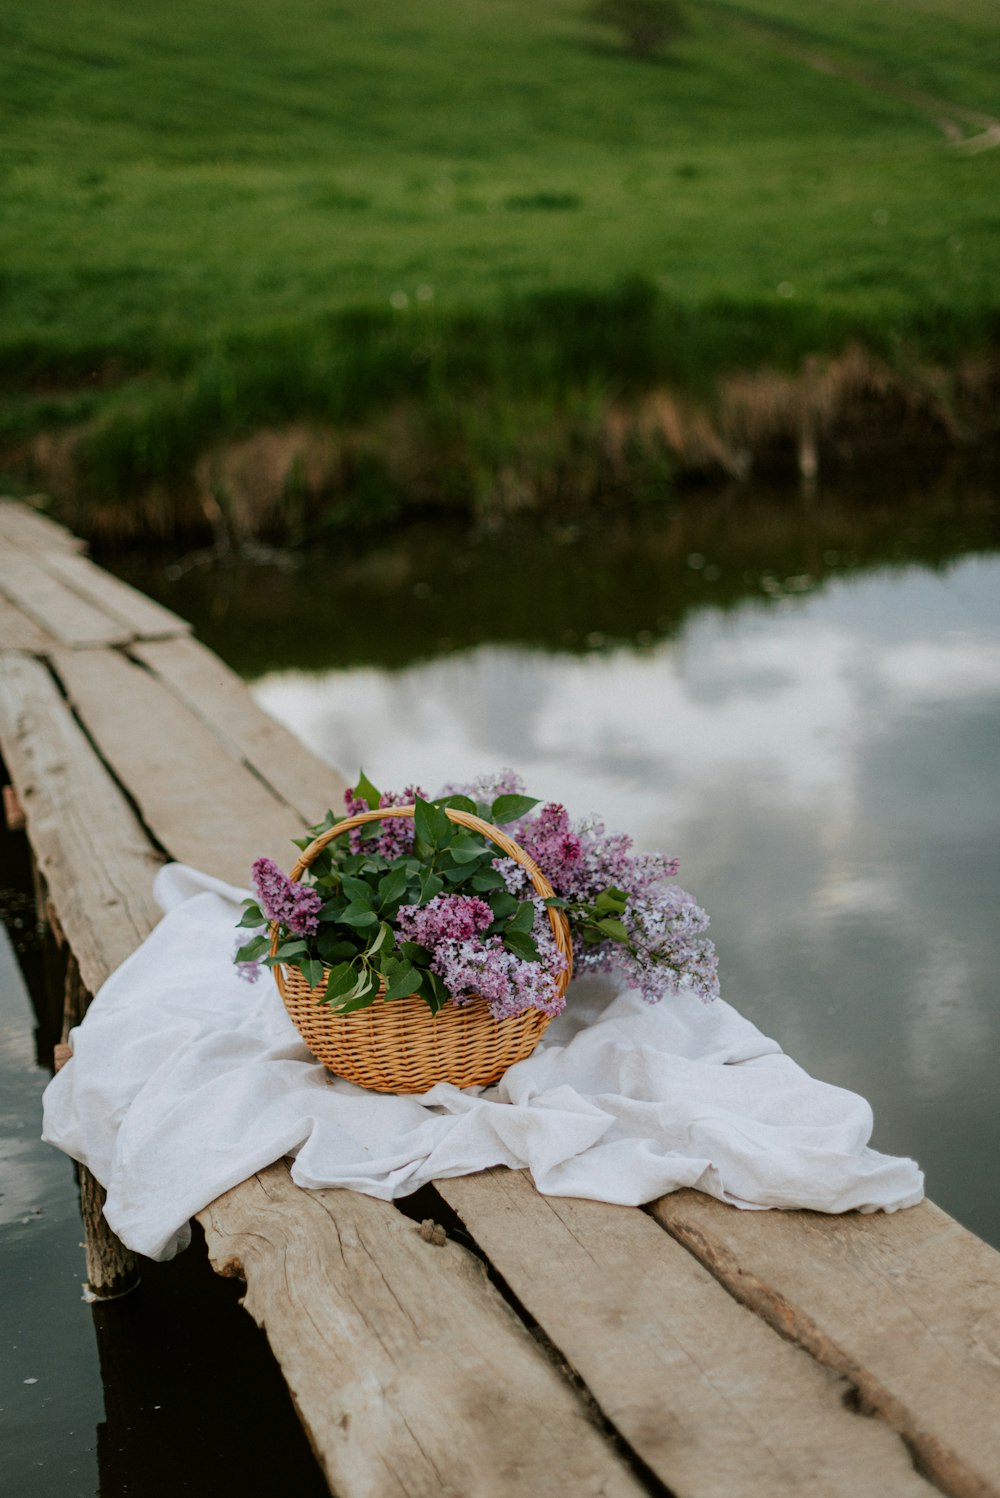 a basket of flowers sitting on a wooden dock